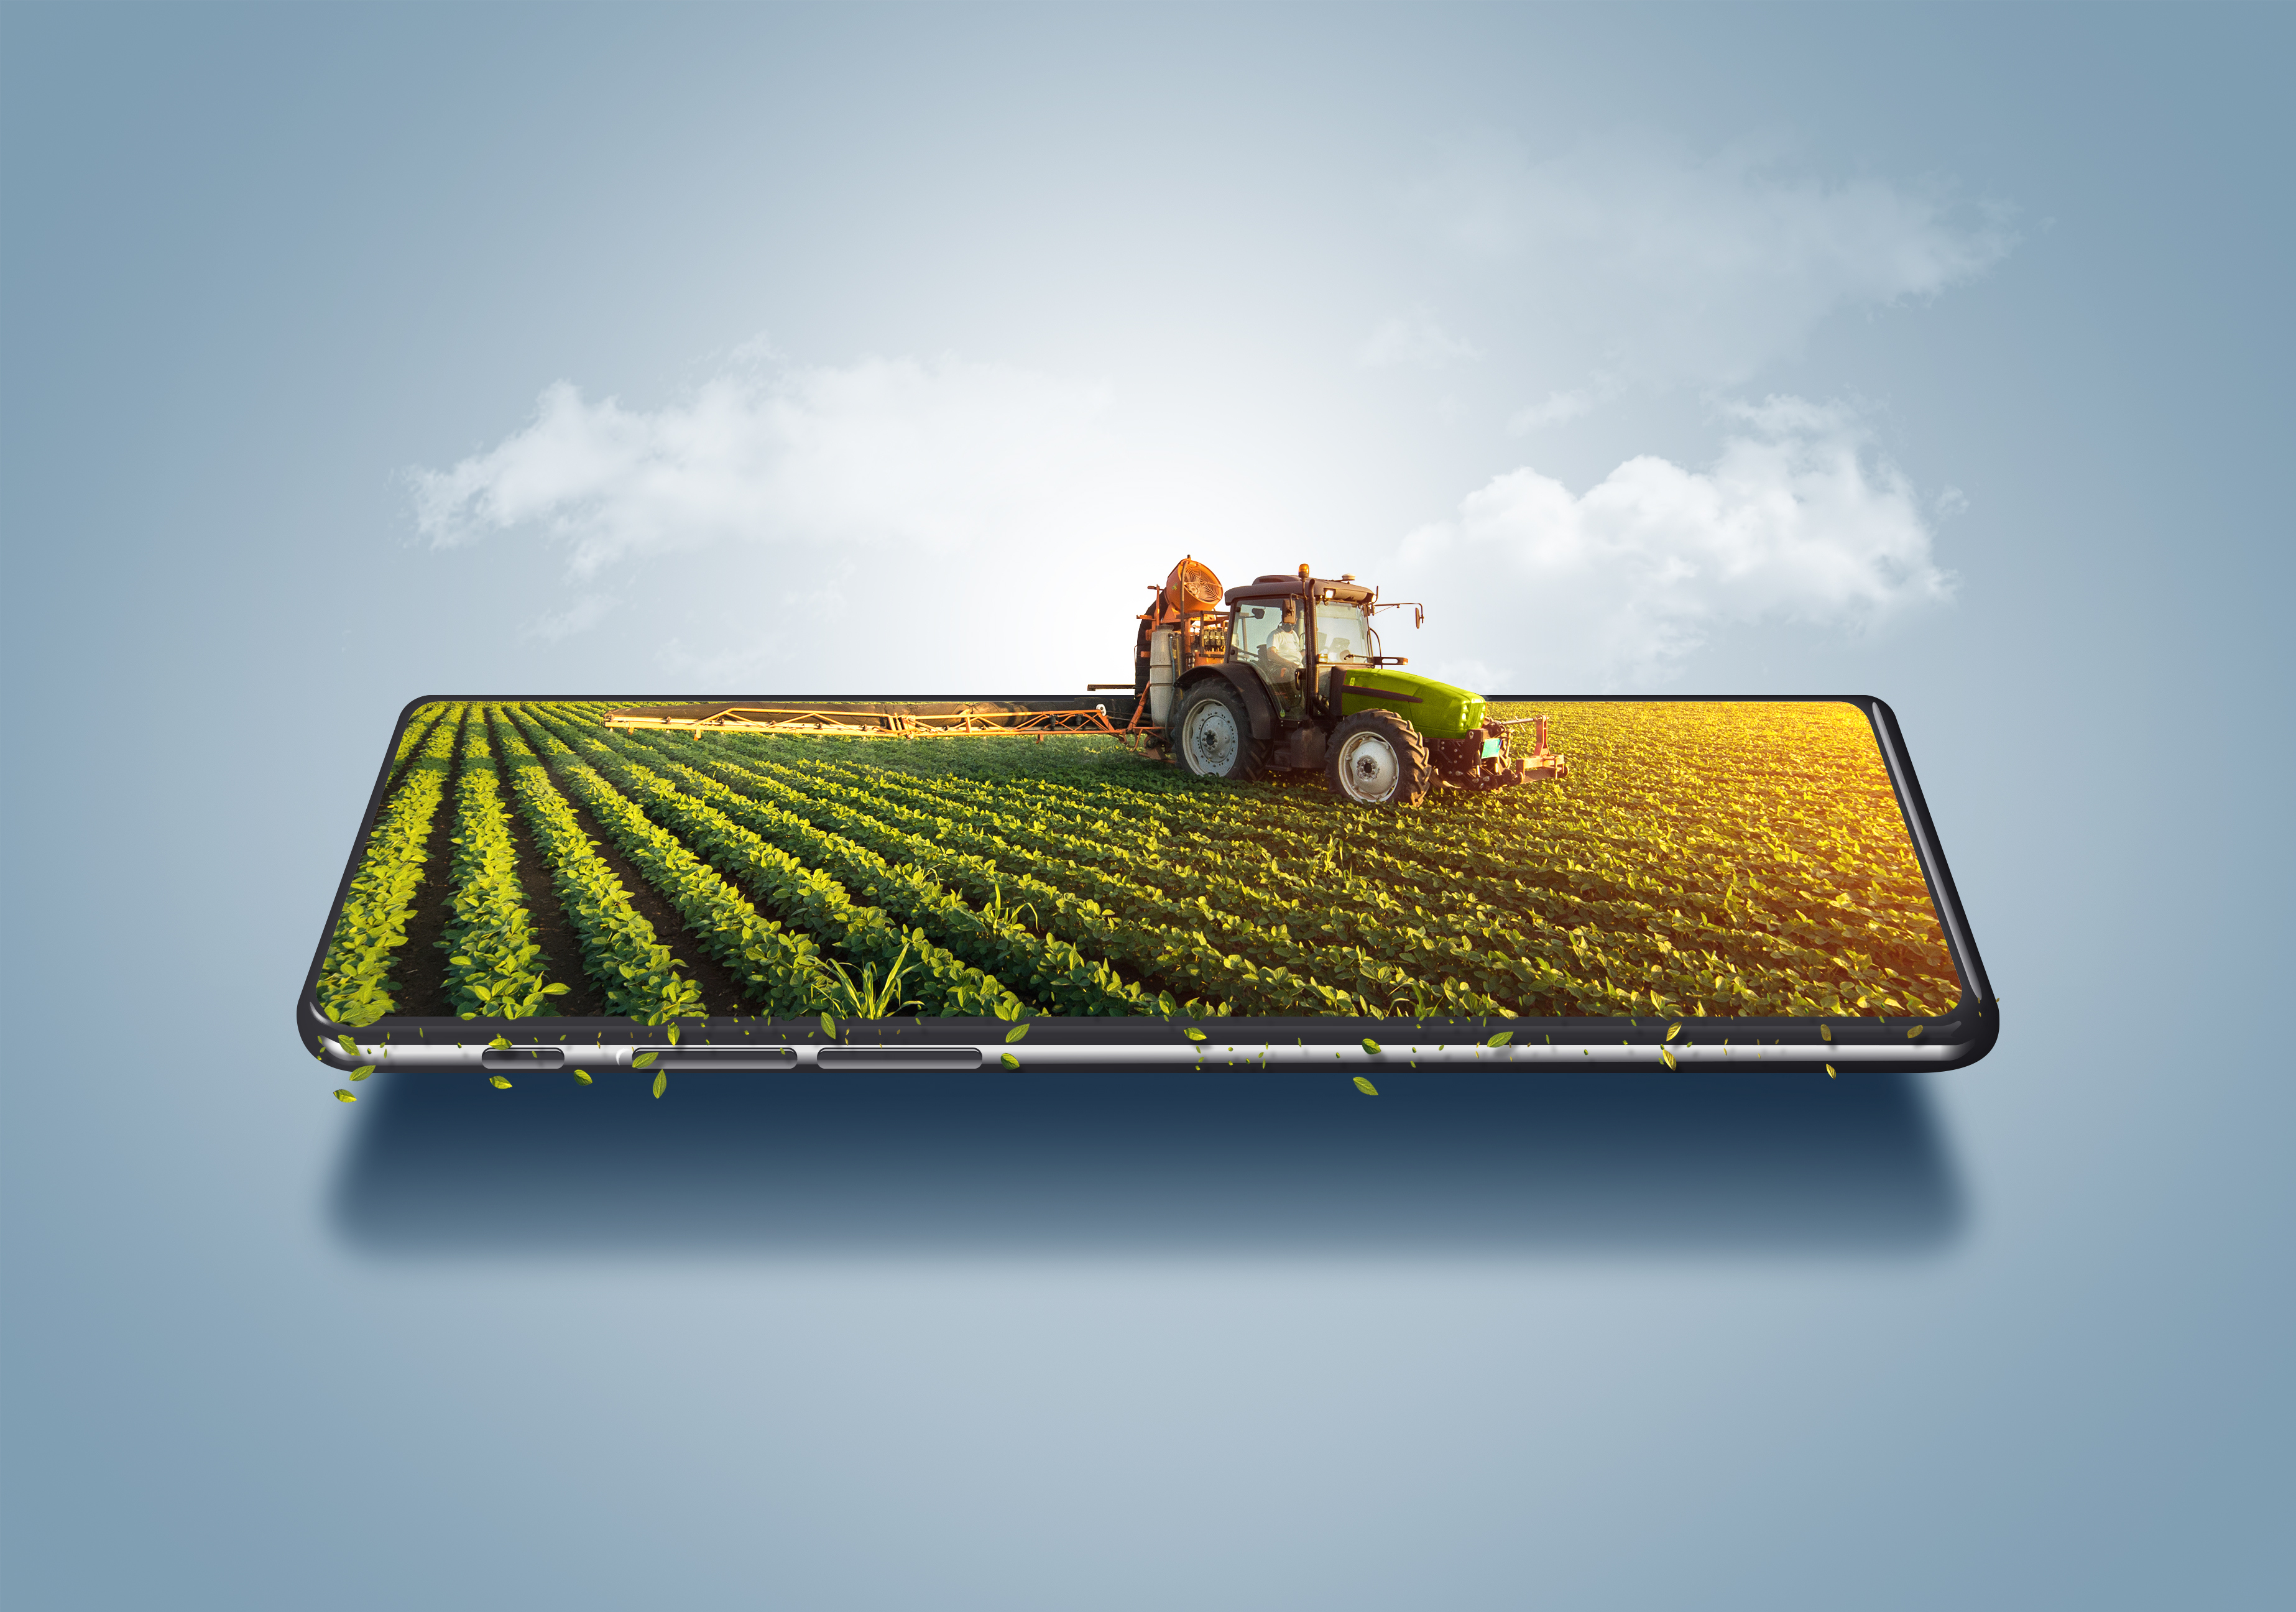 Tractor on a smartphone showing smart farming and agricultural technology